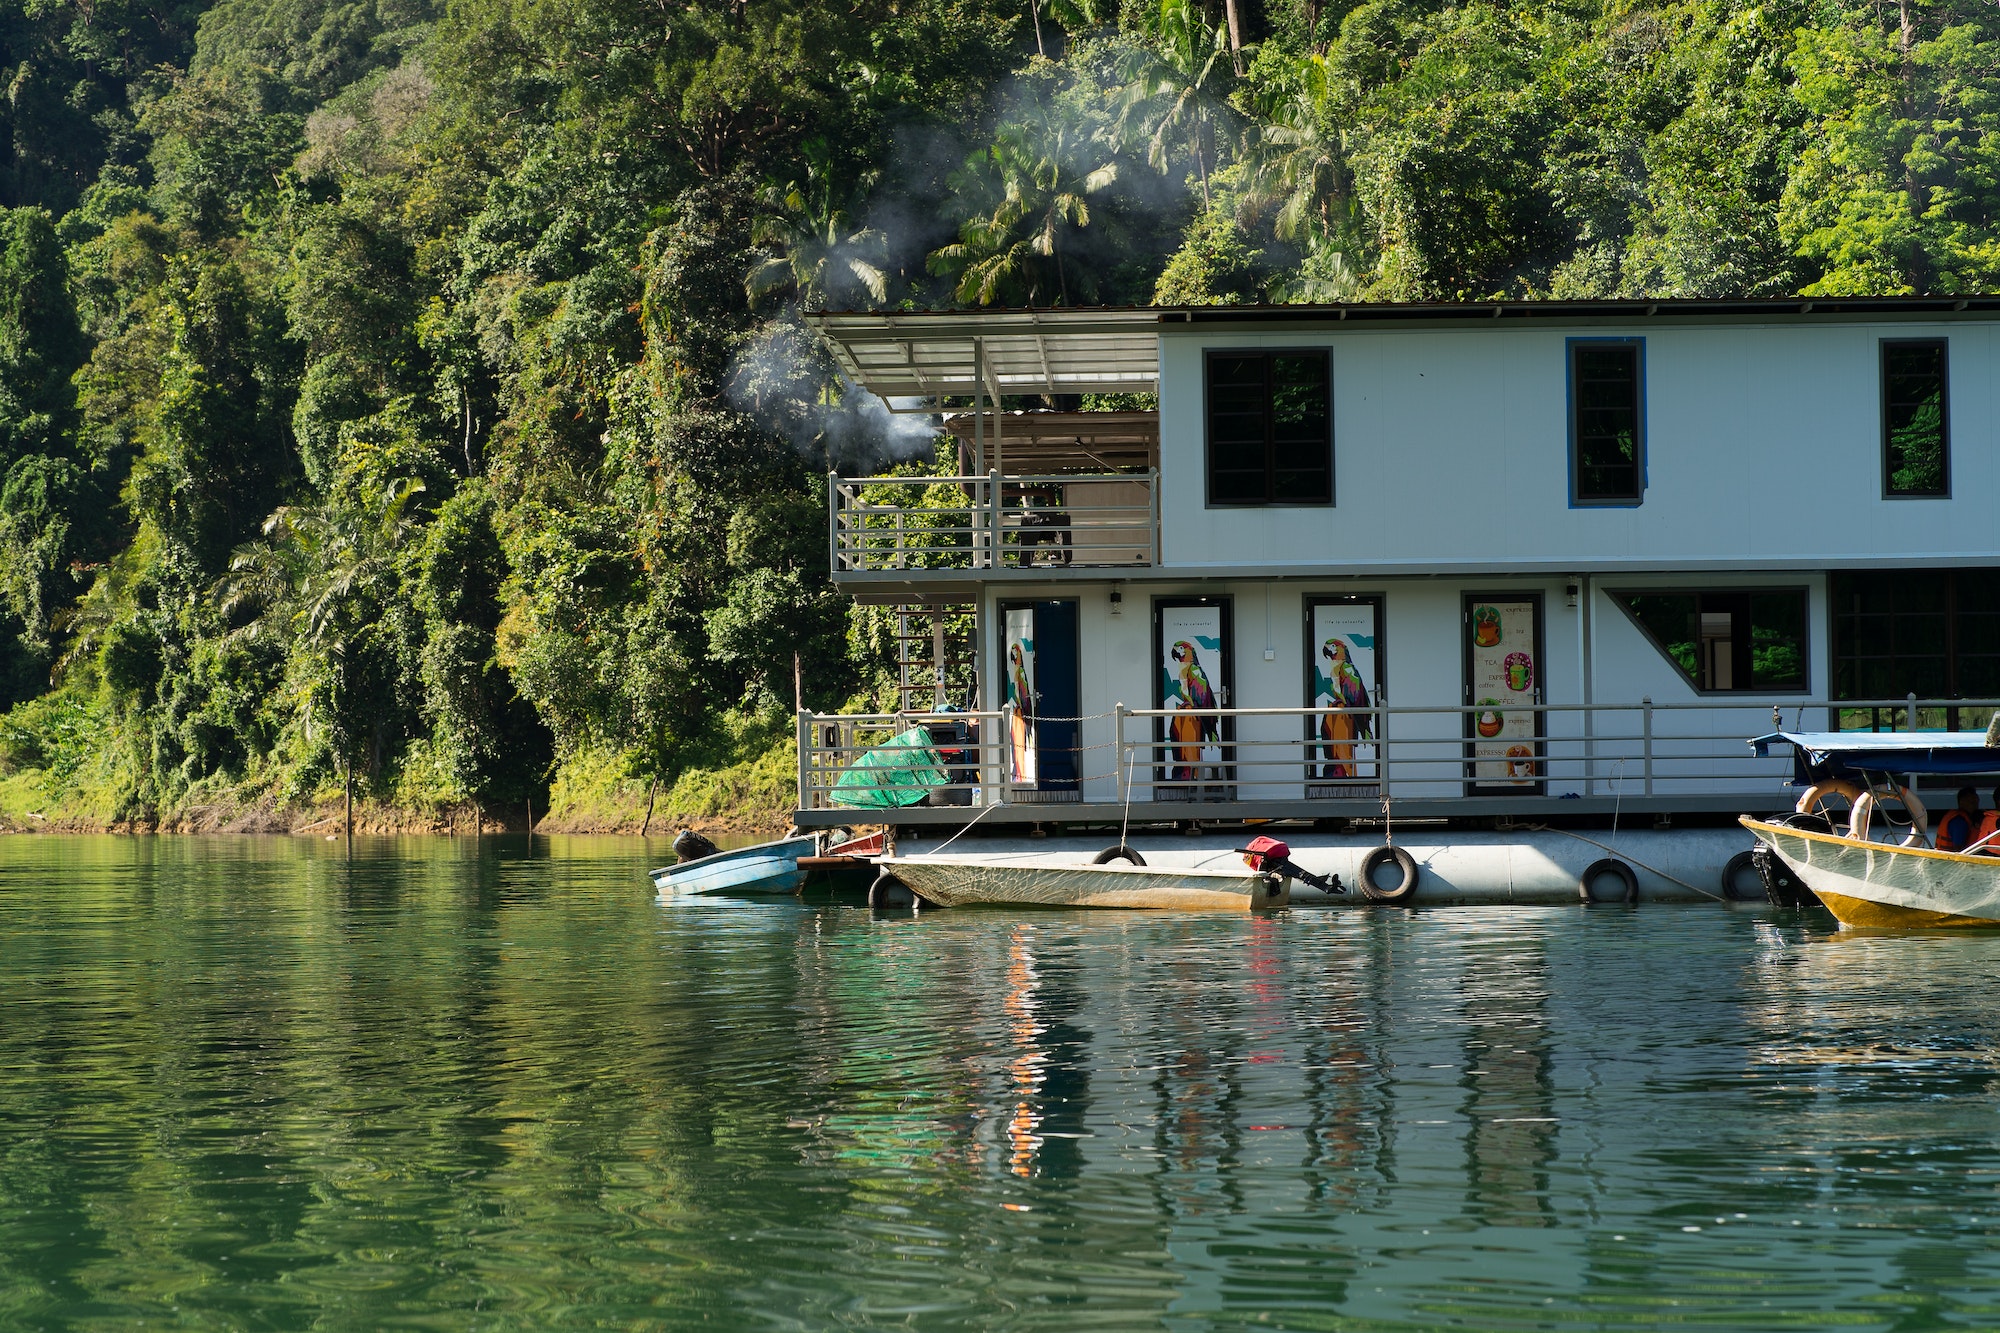 houseboat with smoke coming from the roof anchored on the serene idylic lake.